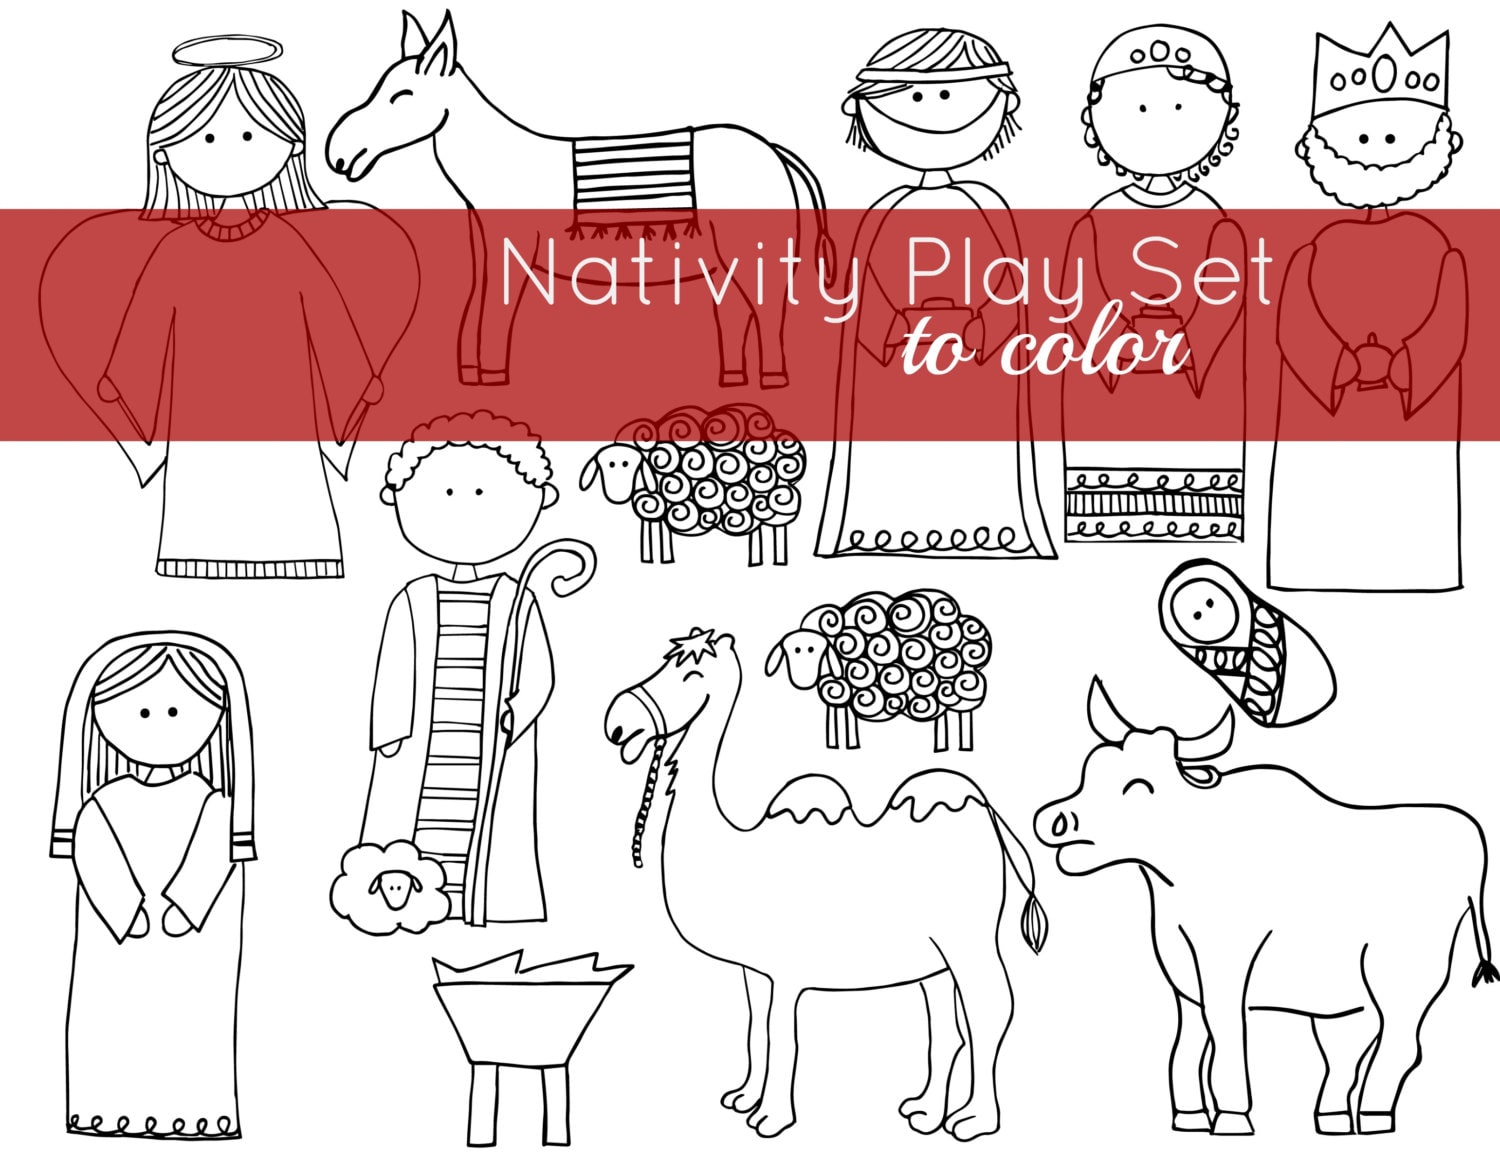 Buy nativity paper play set coloring pages online in india